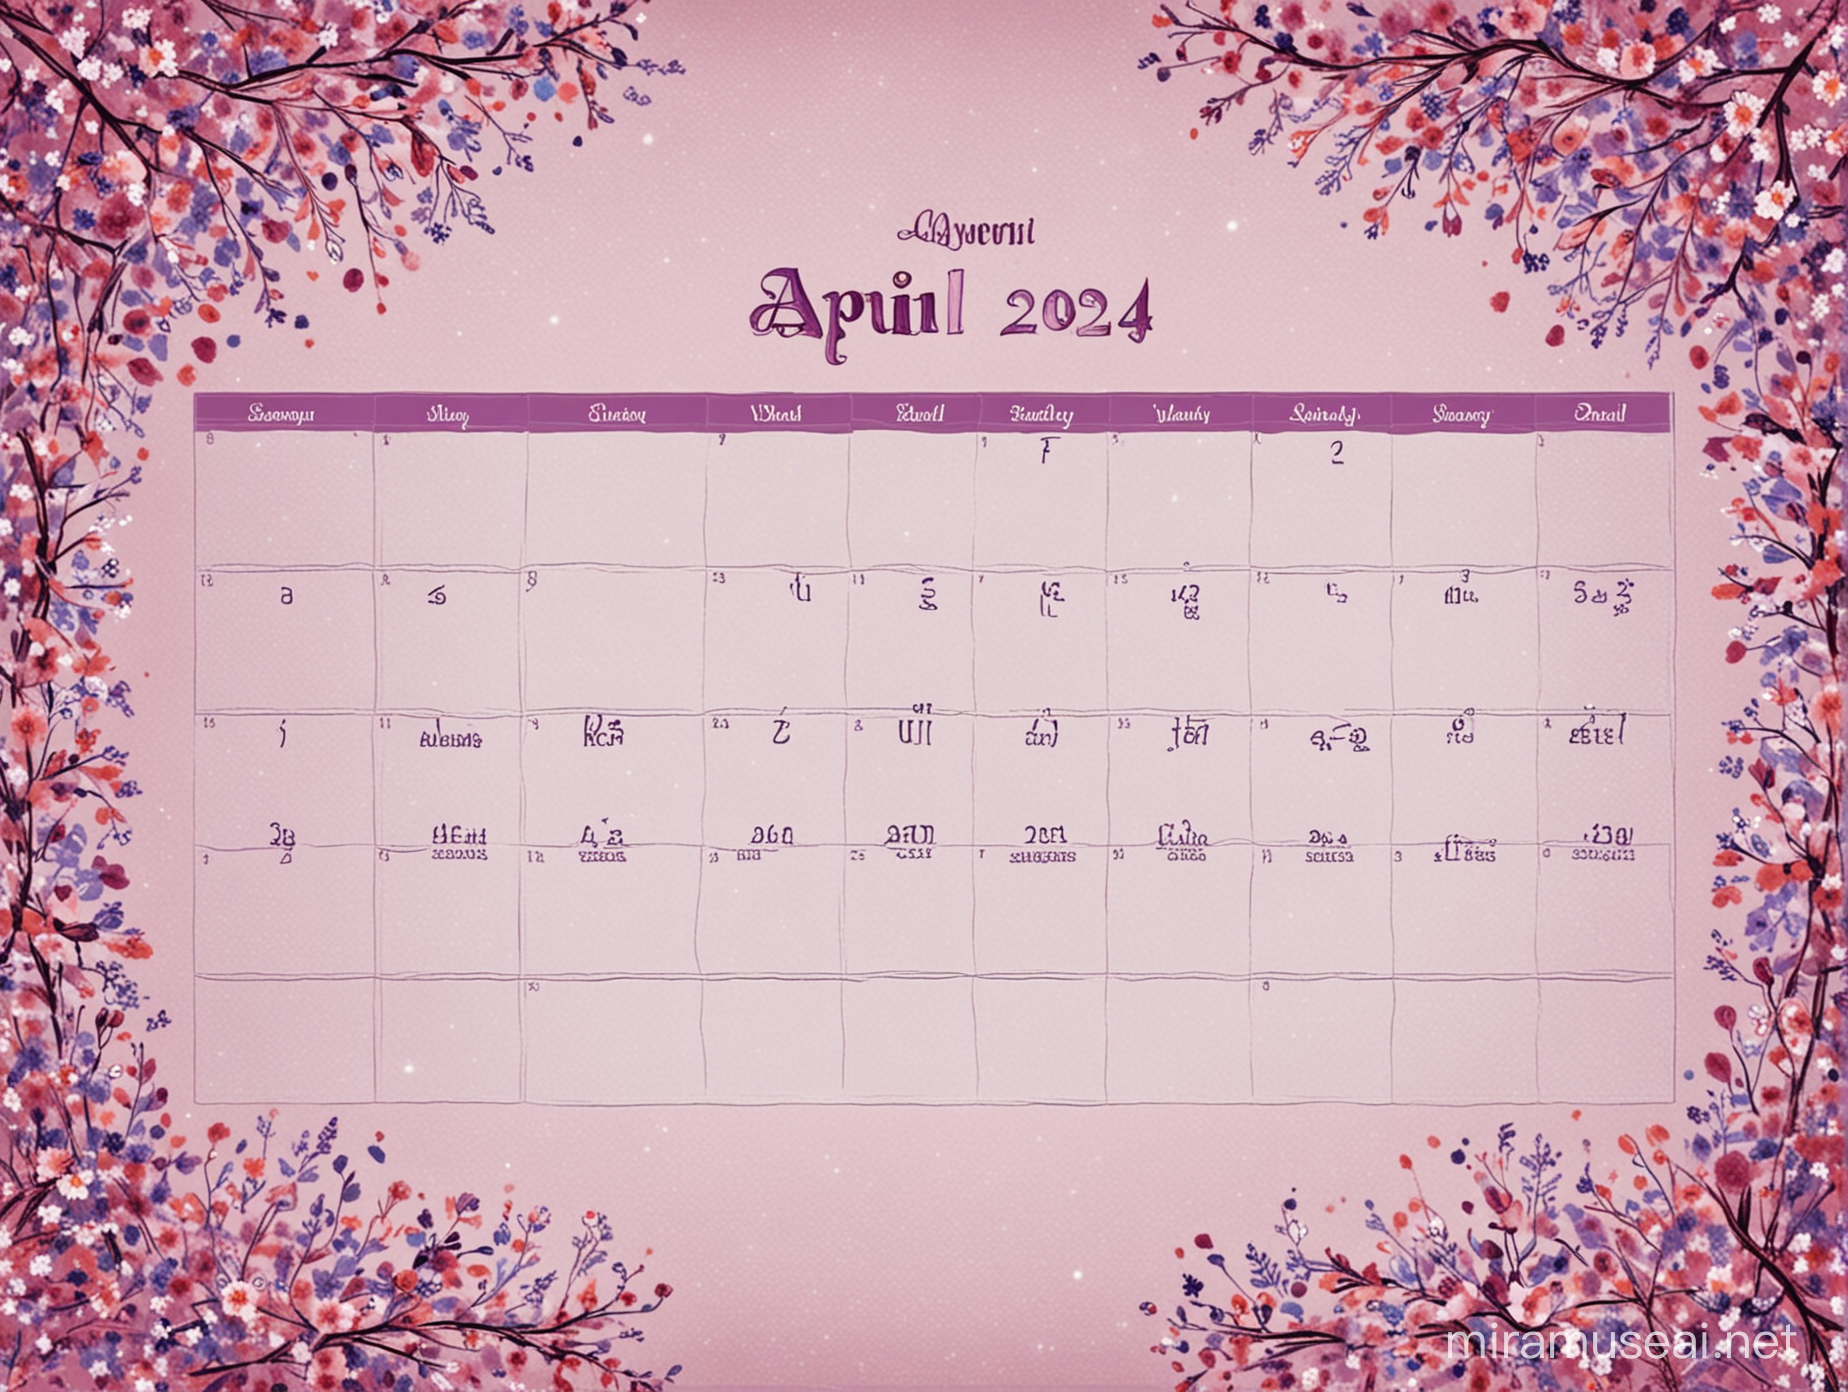 Astrological April Calendar 2024 Featuring Celestial Events and Zodiac Signs